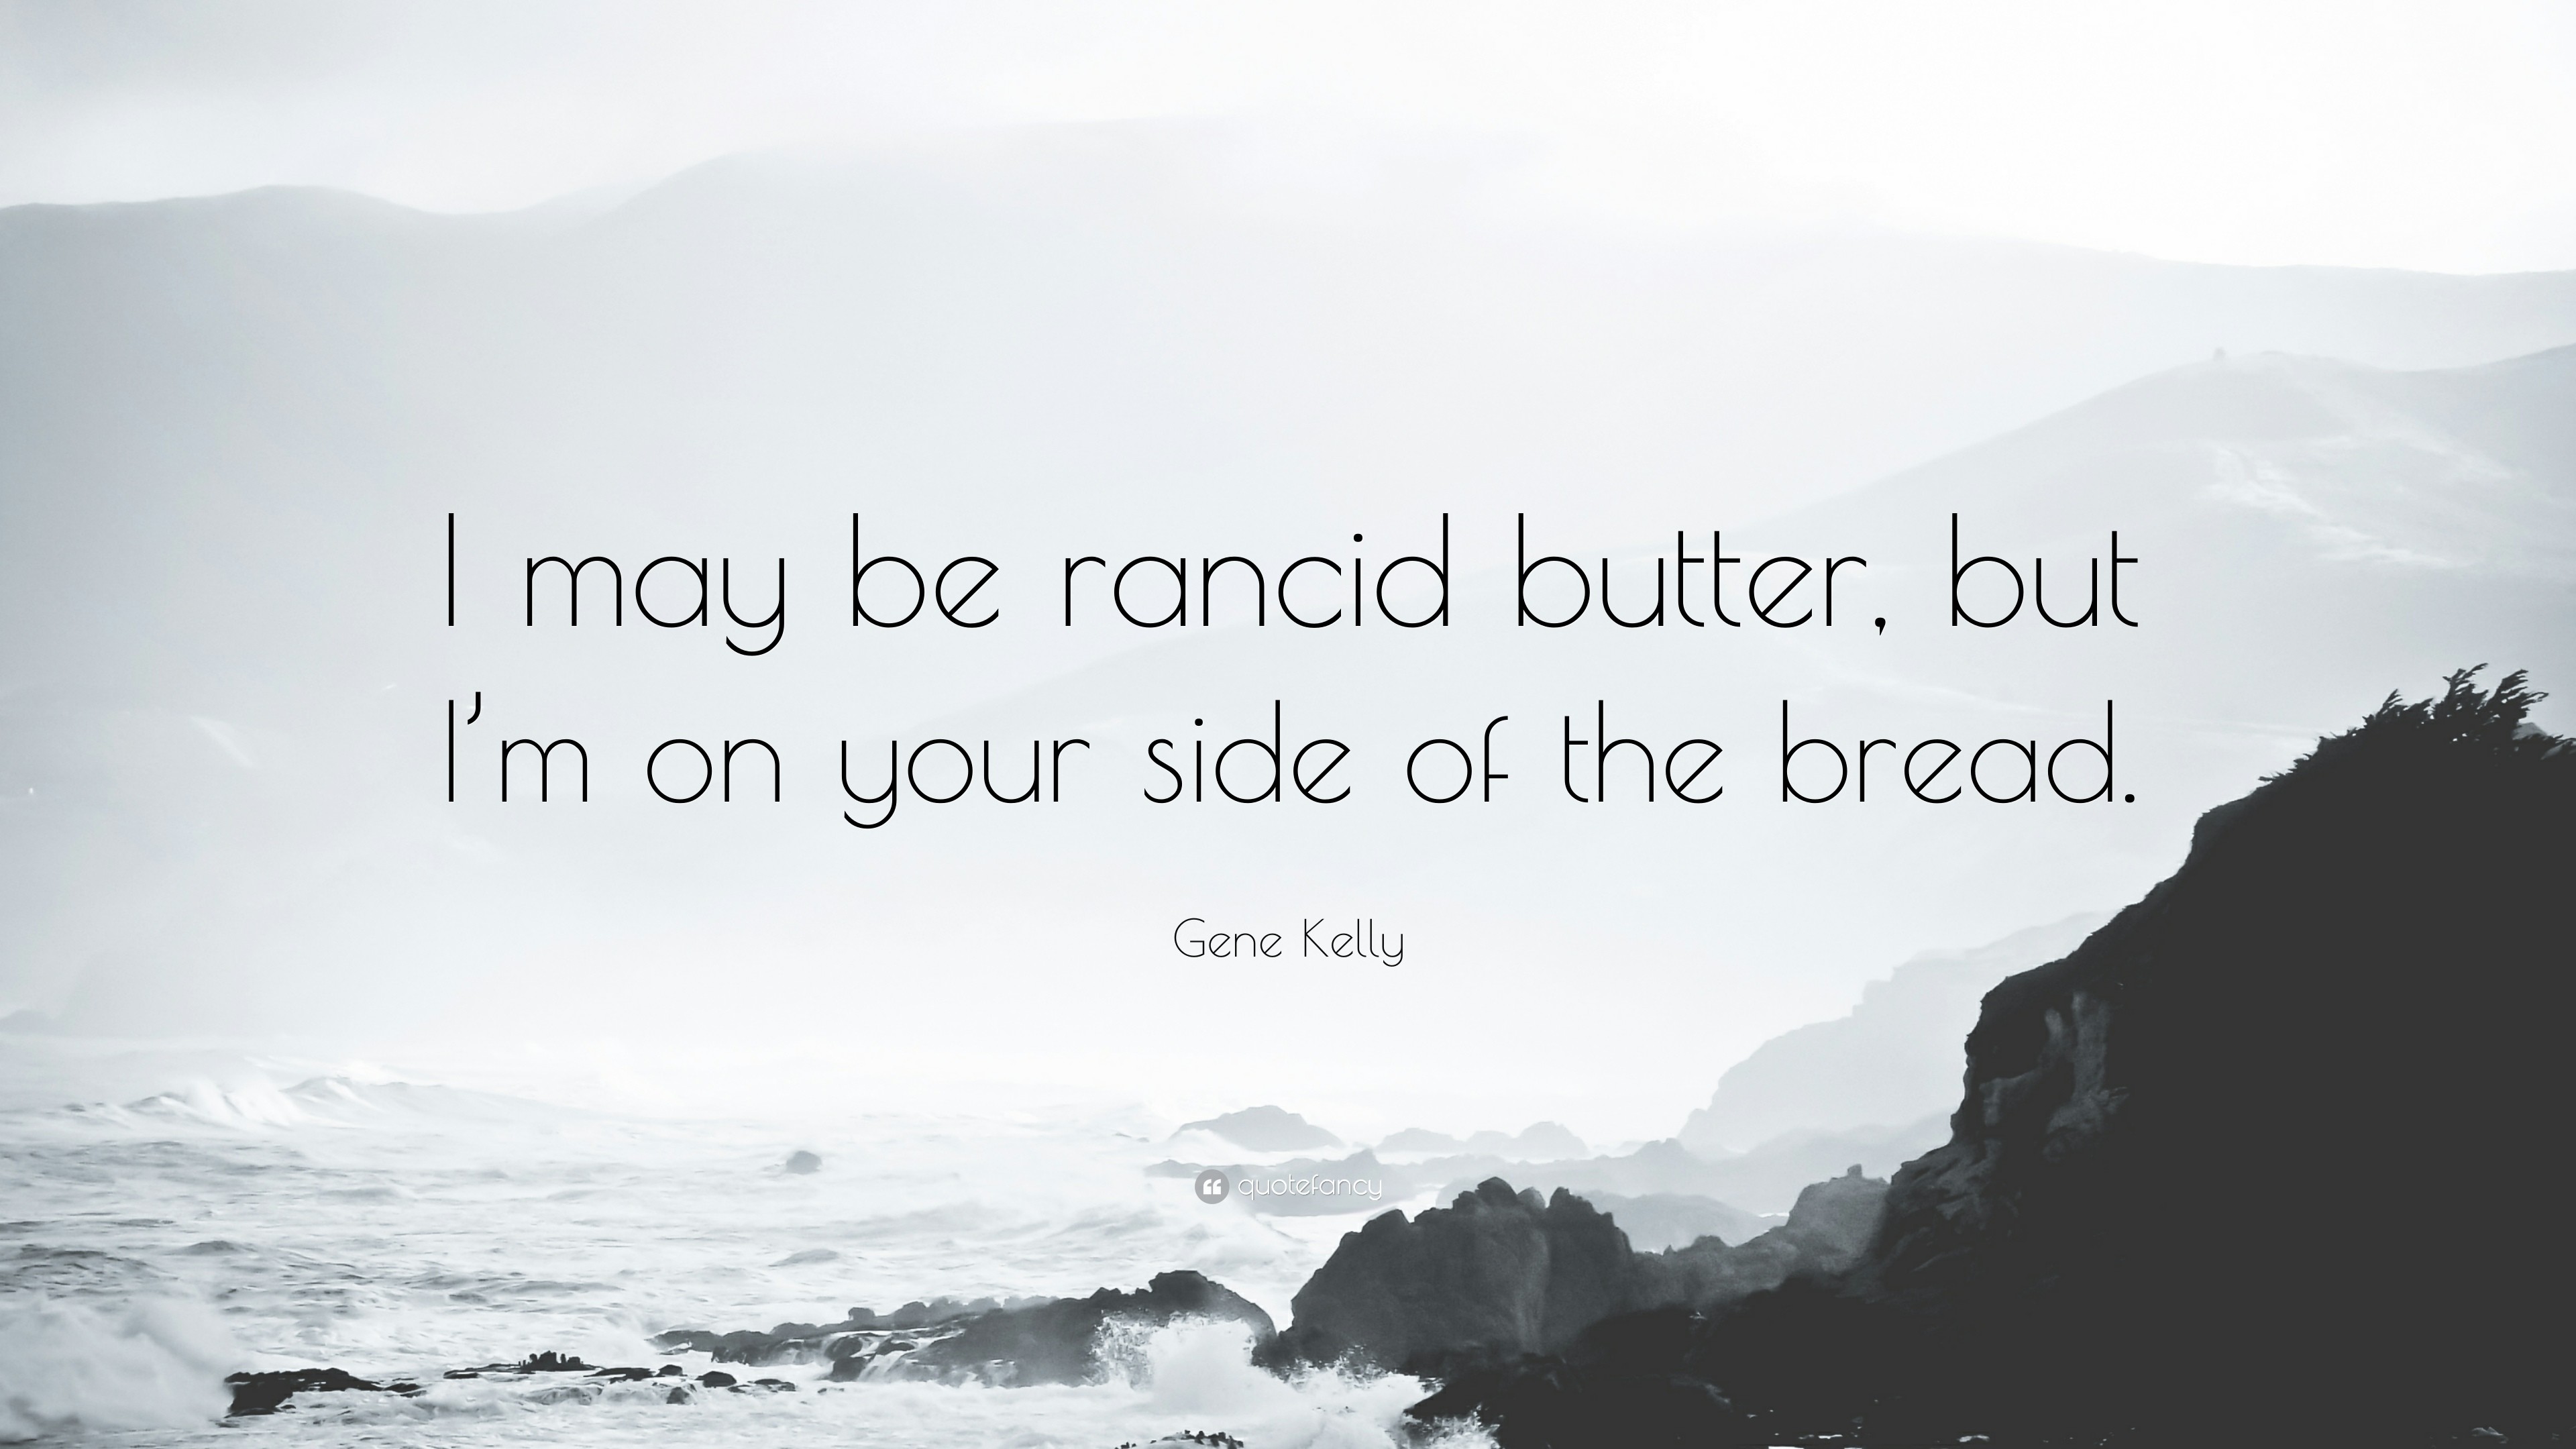 3840x2160 Gene Kelly Quote: “I may be rancid butter, but I'm on